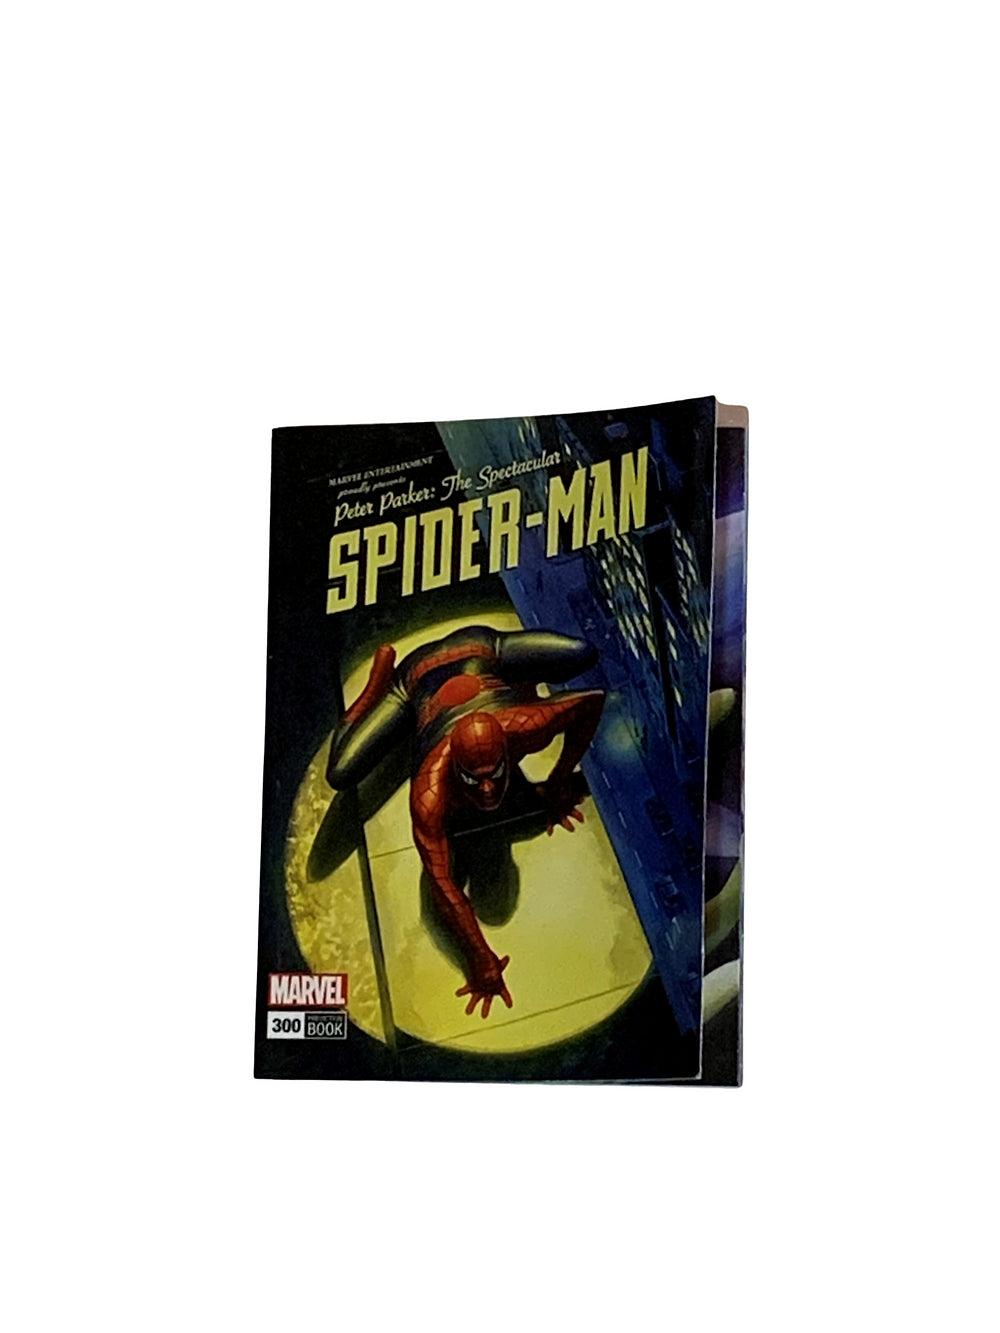 Spider-Man Multiverse of Magic Collectible Set